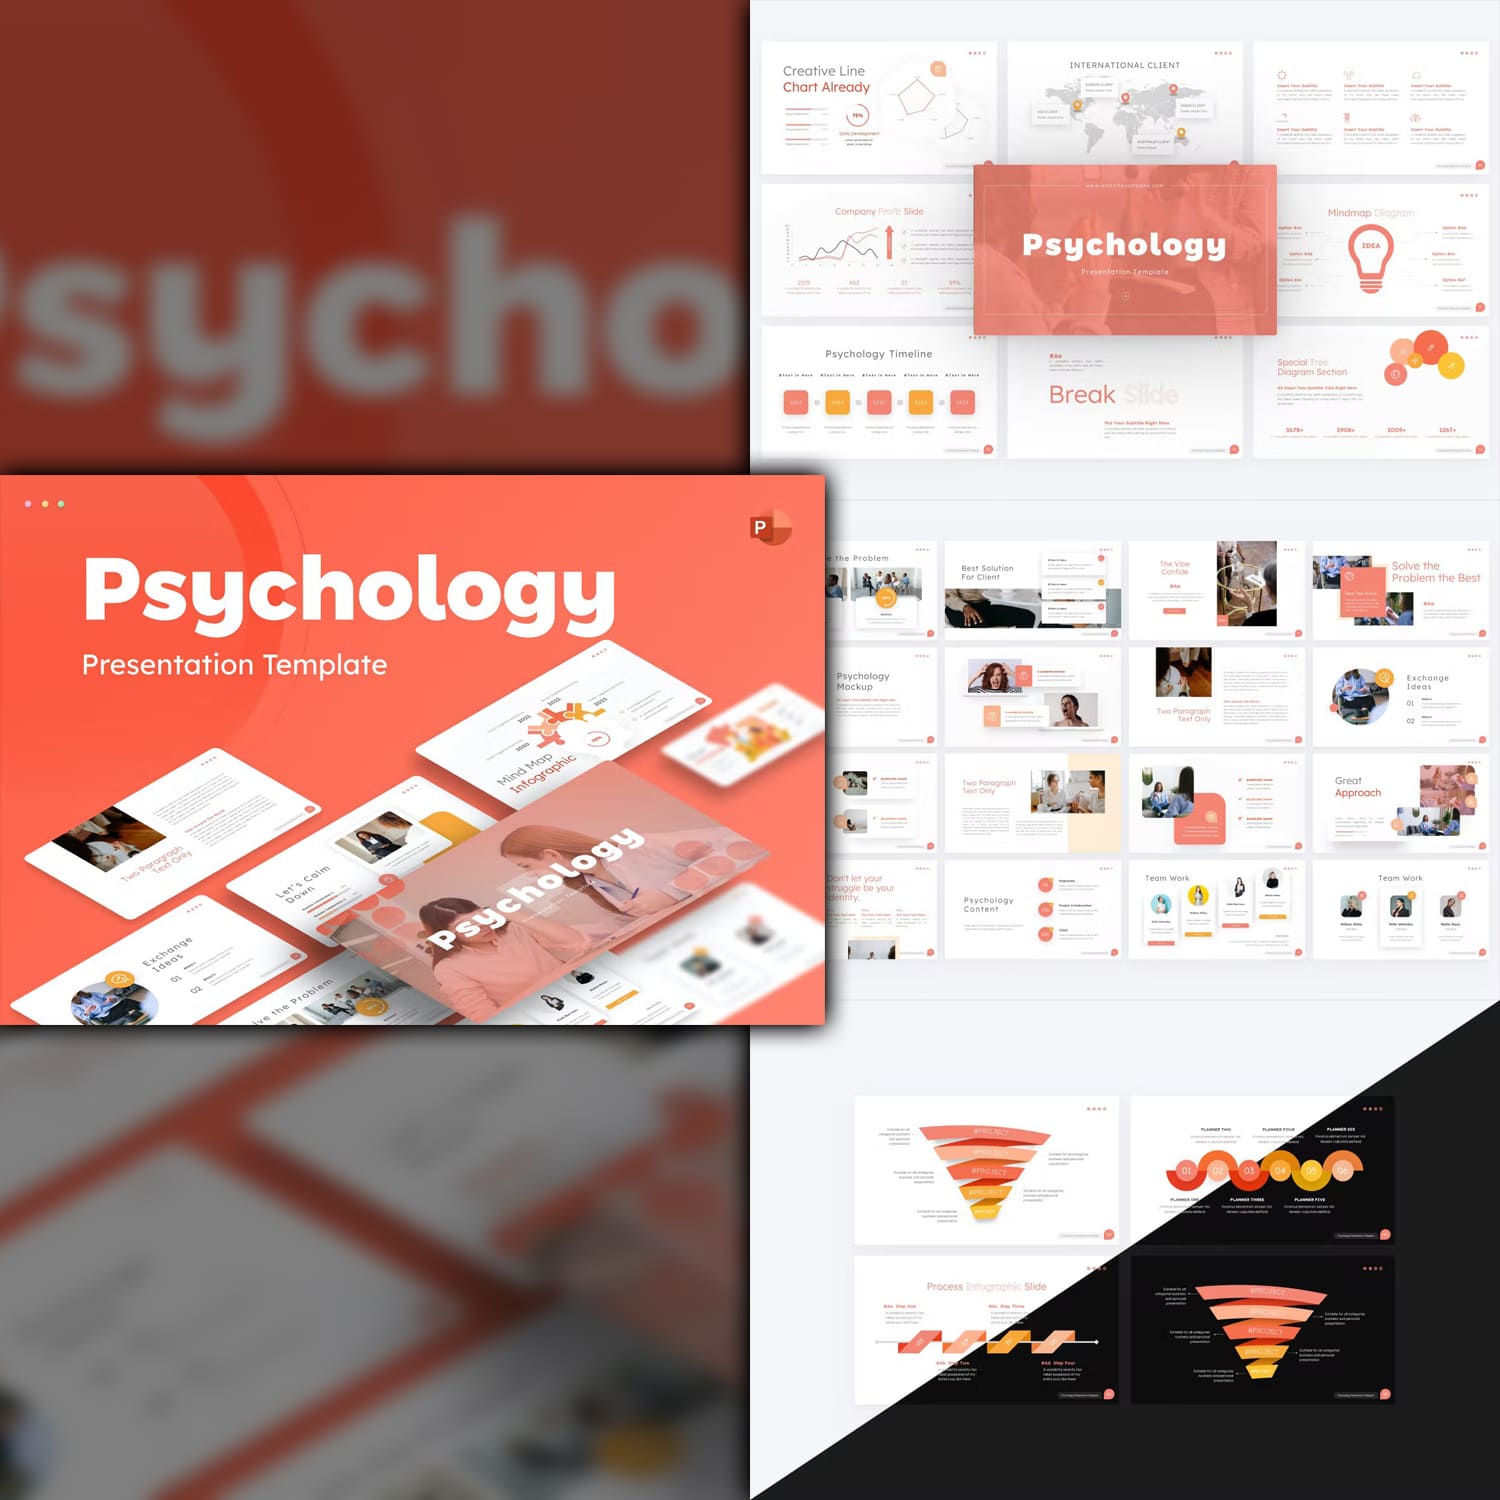 Psychology professional powerpoint template from RRgraph.